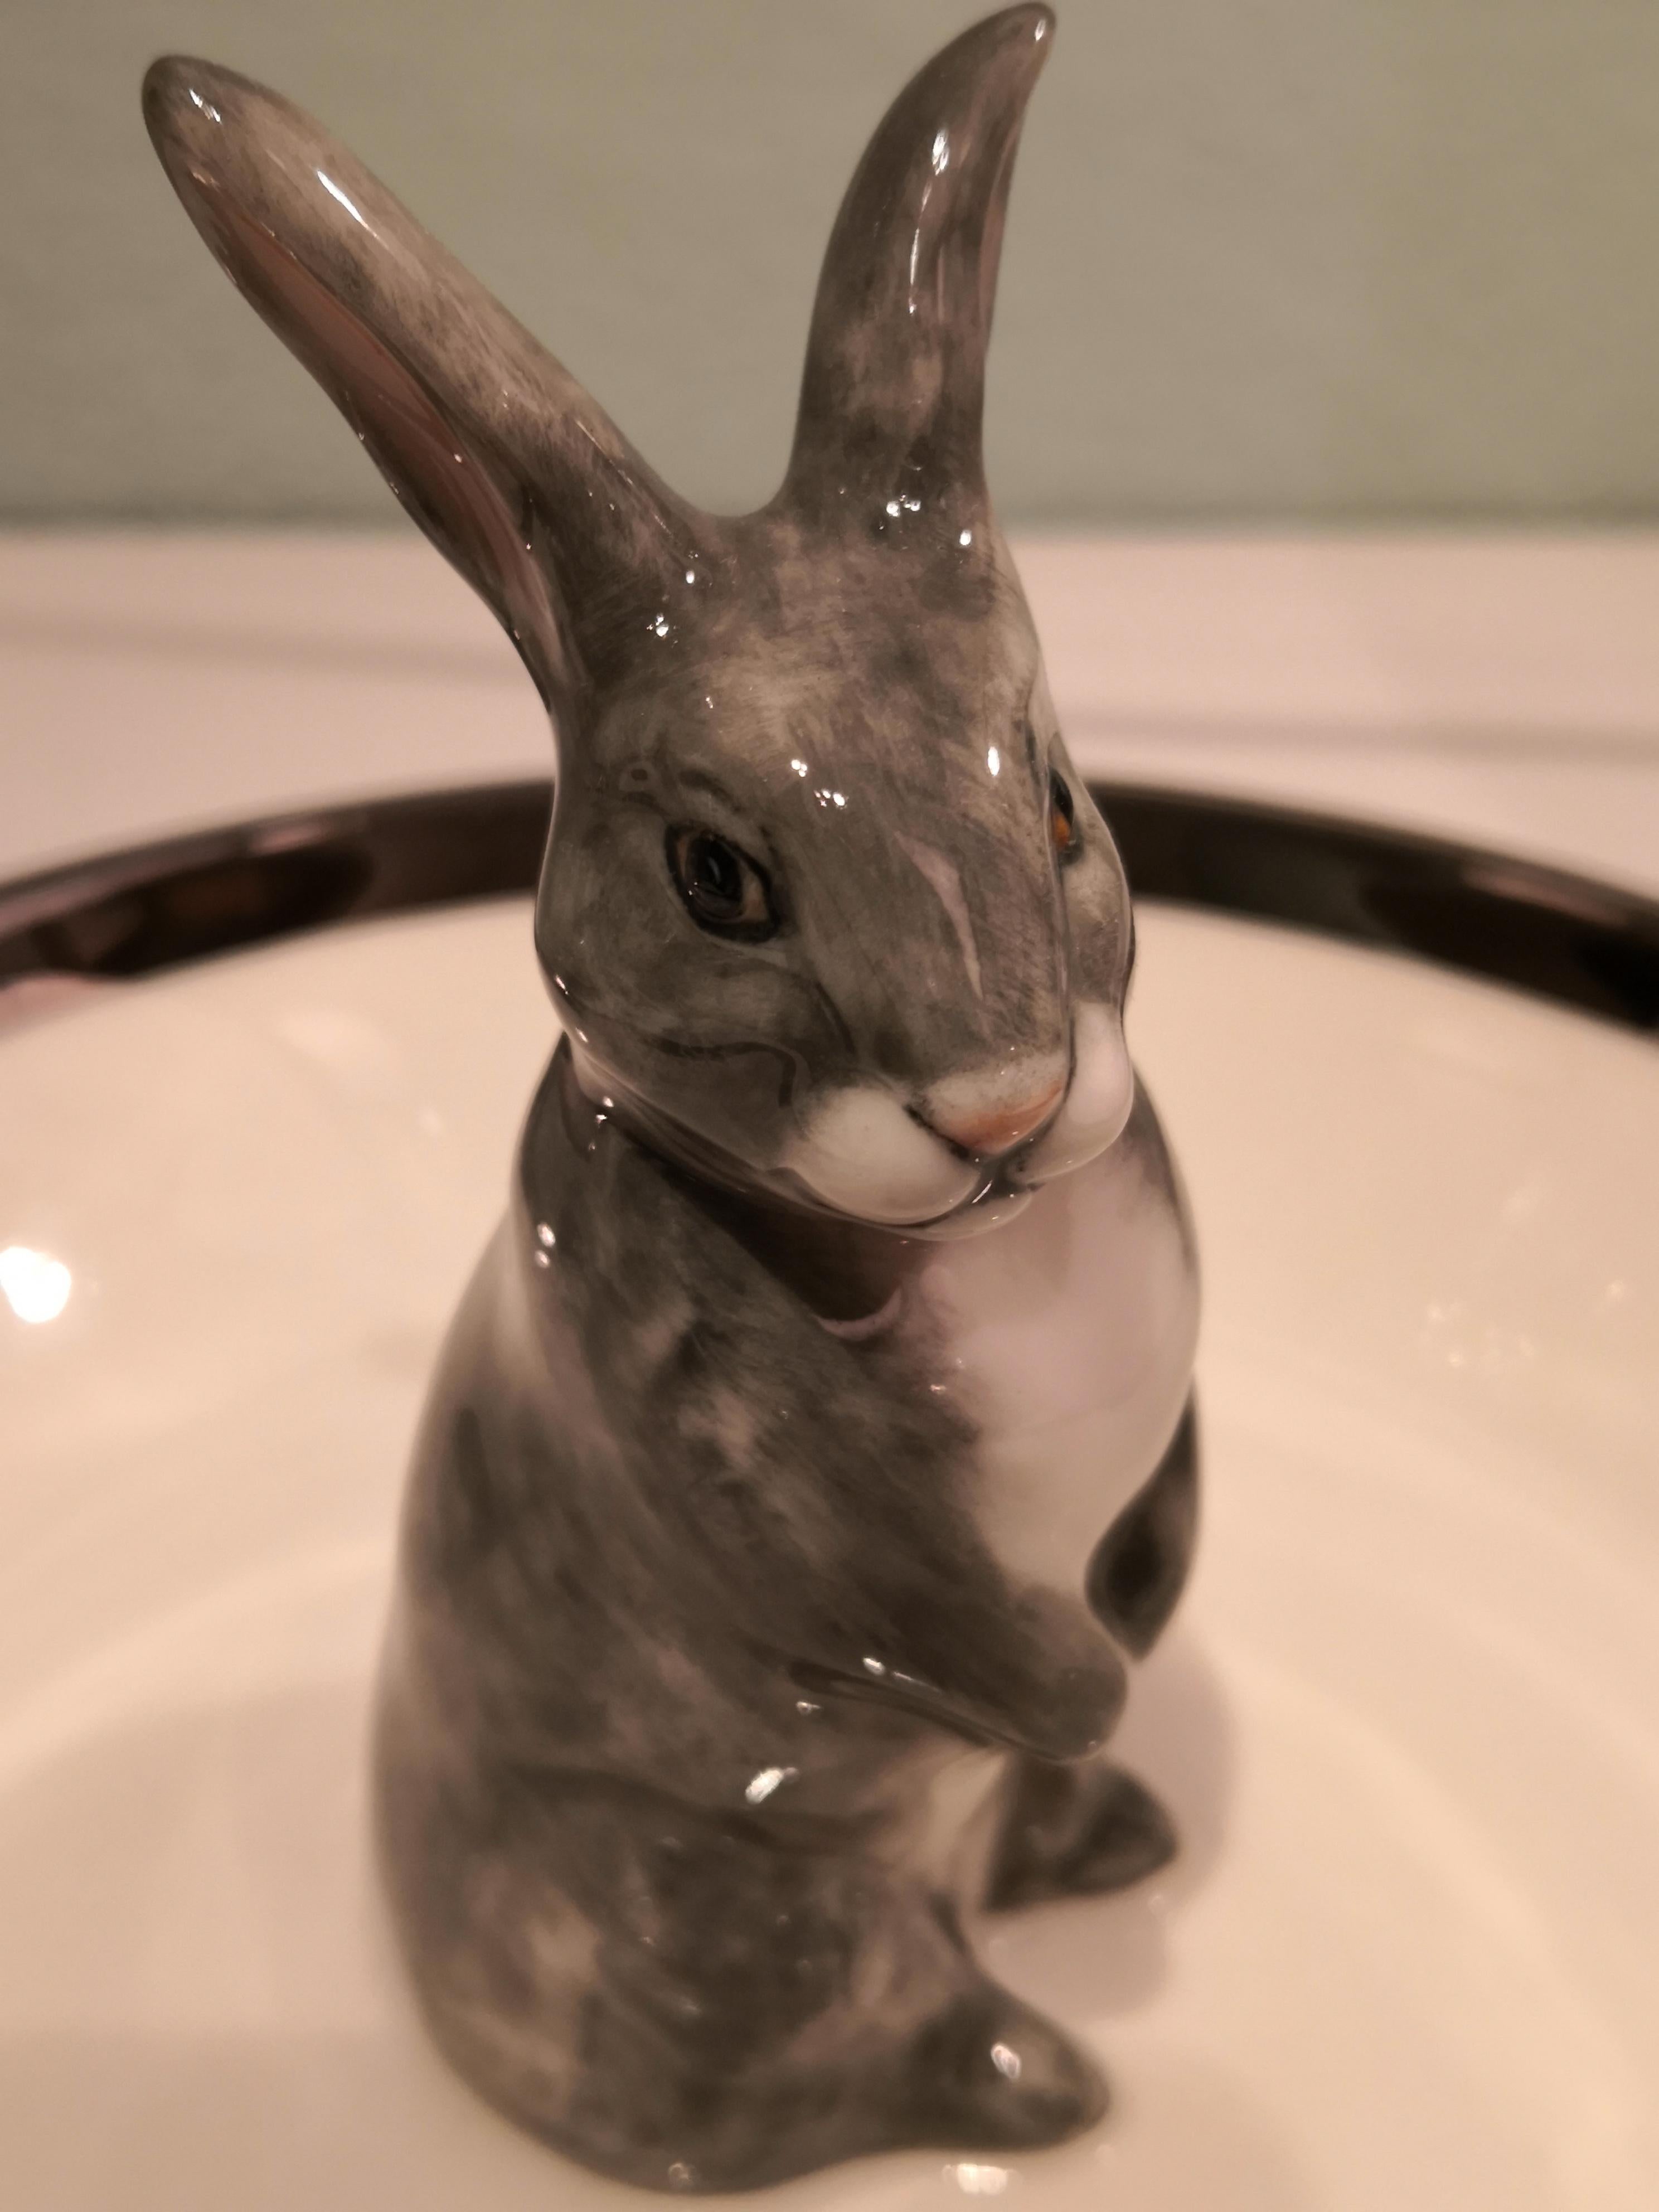 Completely handmade porcelain bowl with a hands-free naturalistic painted Easter rabbit in grey and white colors. The rabbit is sitting in the middle of the bowl for decorating nuts or sweets around the figure. Rimmed with a fine platinum line.